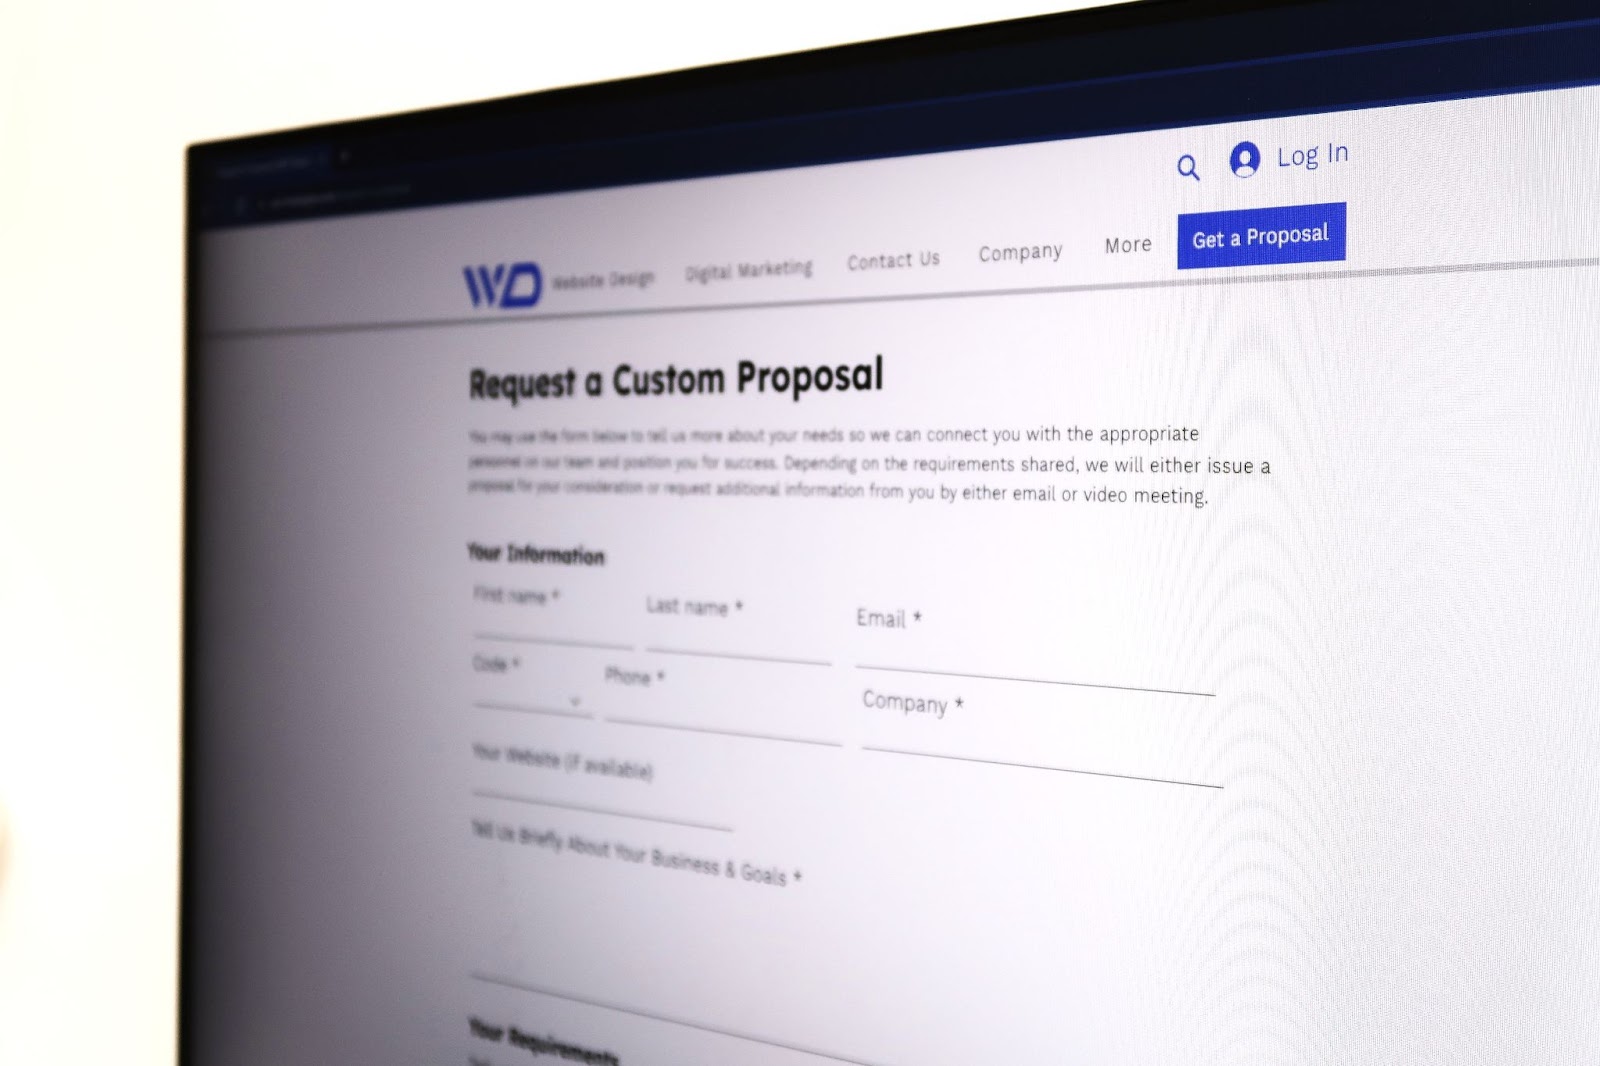 A landing page of a website about requesting a custom proposal